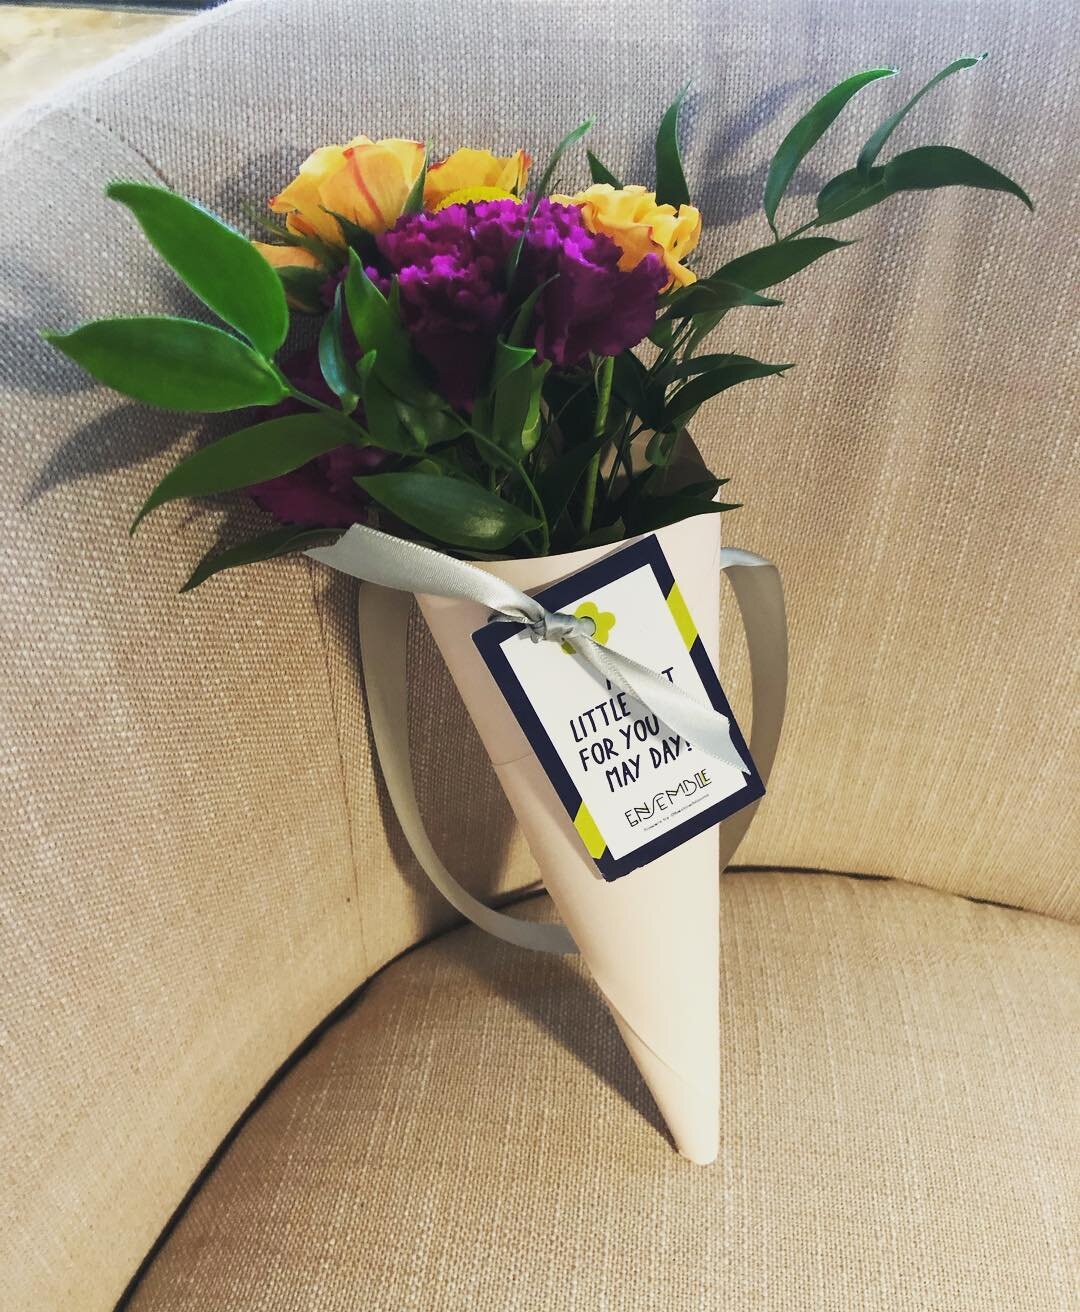 What a great May Day gift from our client @ensemblexdstudio 🌺🌿 You brightened our day! So thoughtful!